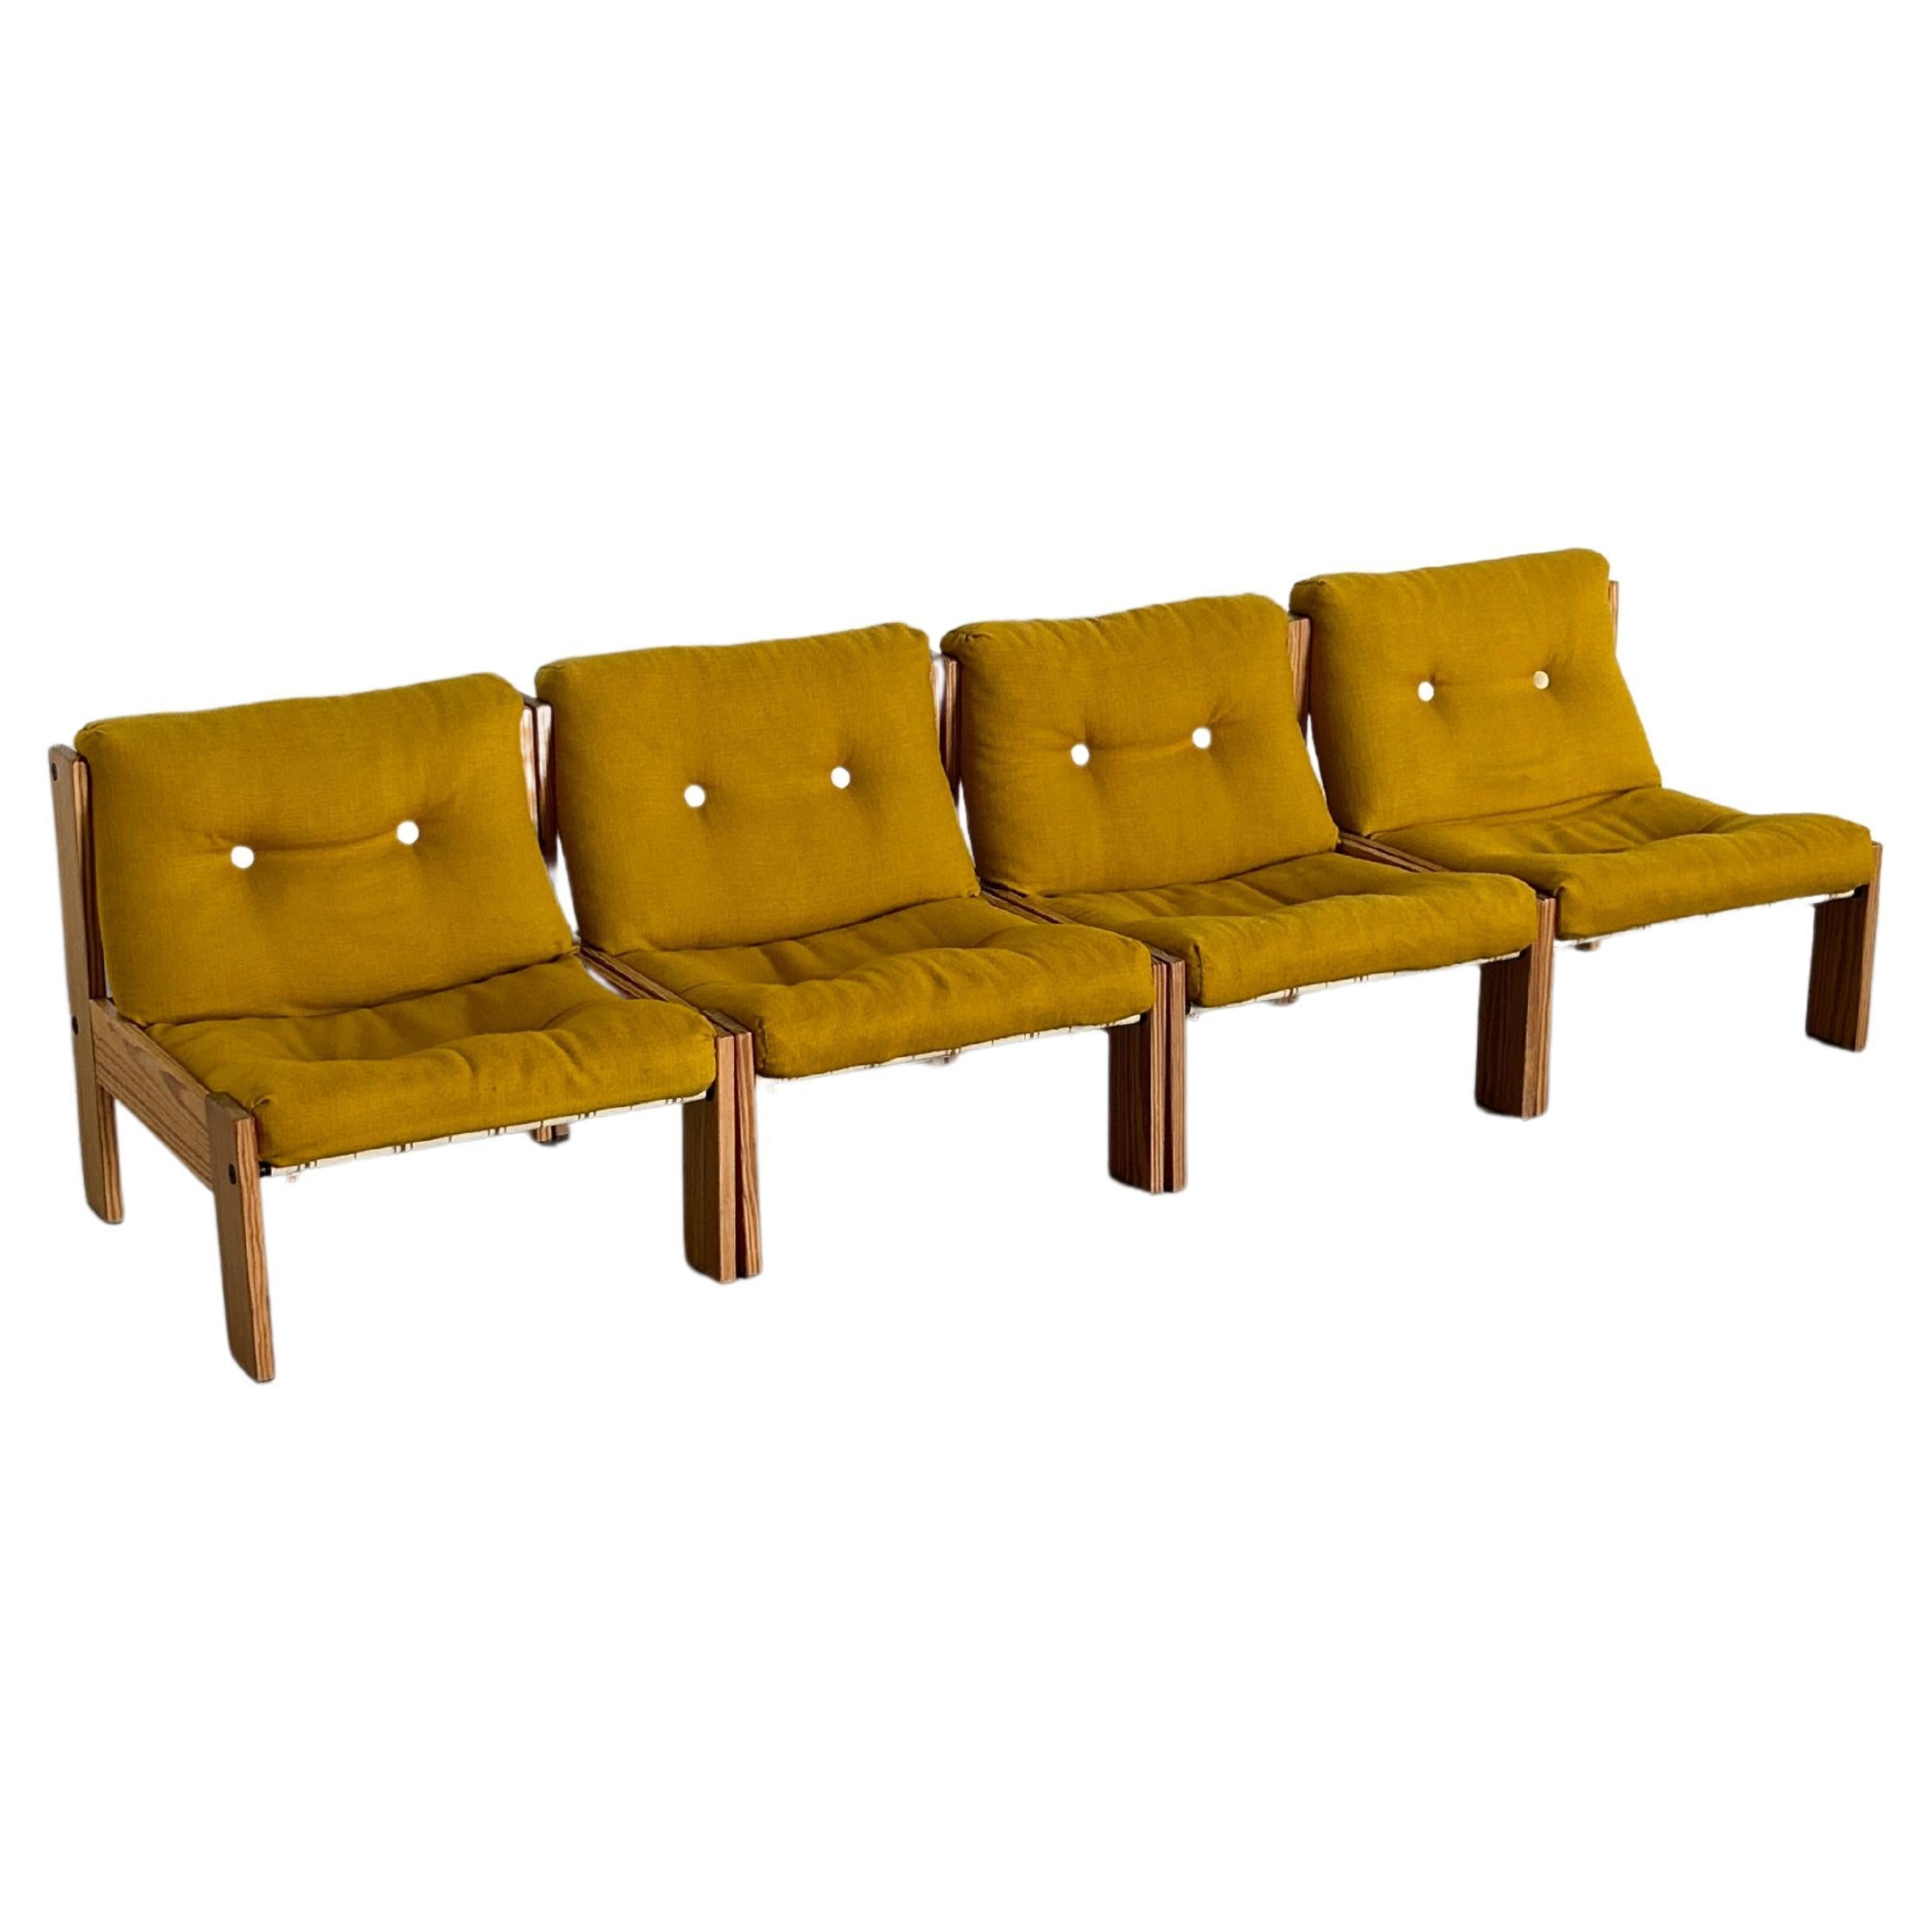 Beautiful Mid-Century-Modern four-part seating set in ocher yellow, produced by Herlag Deventer, 1950s Netherlands. 

Very reminiscent of Scandinavian design, this modular seating set can be modified and played with, leading to a number of seating